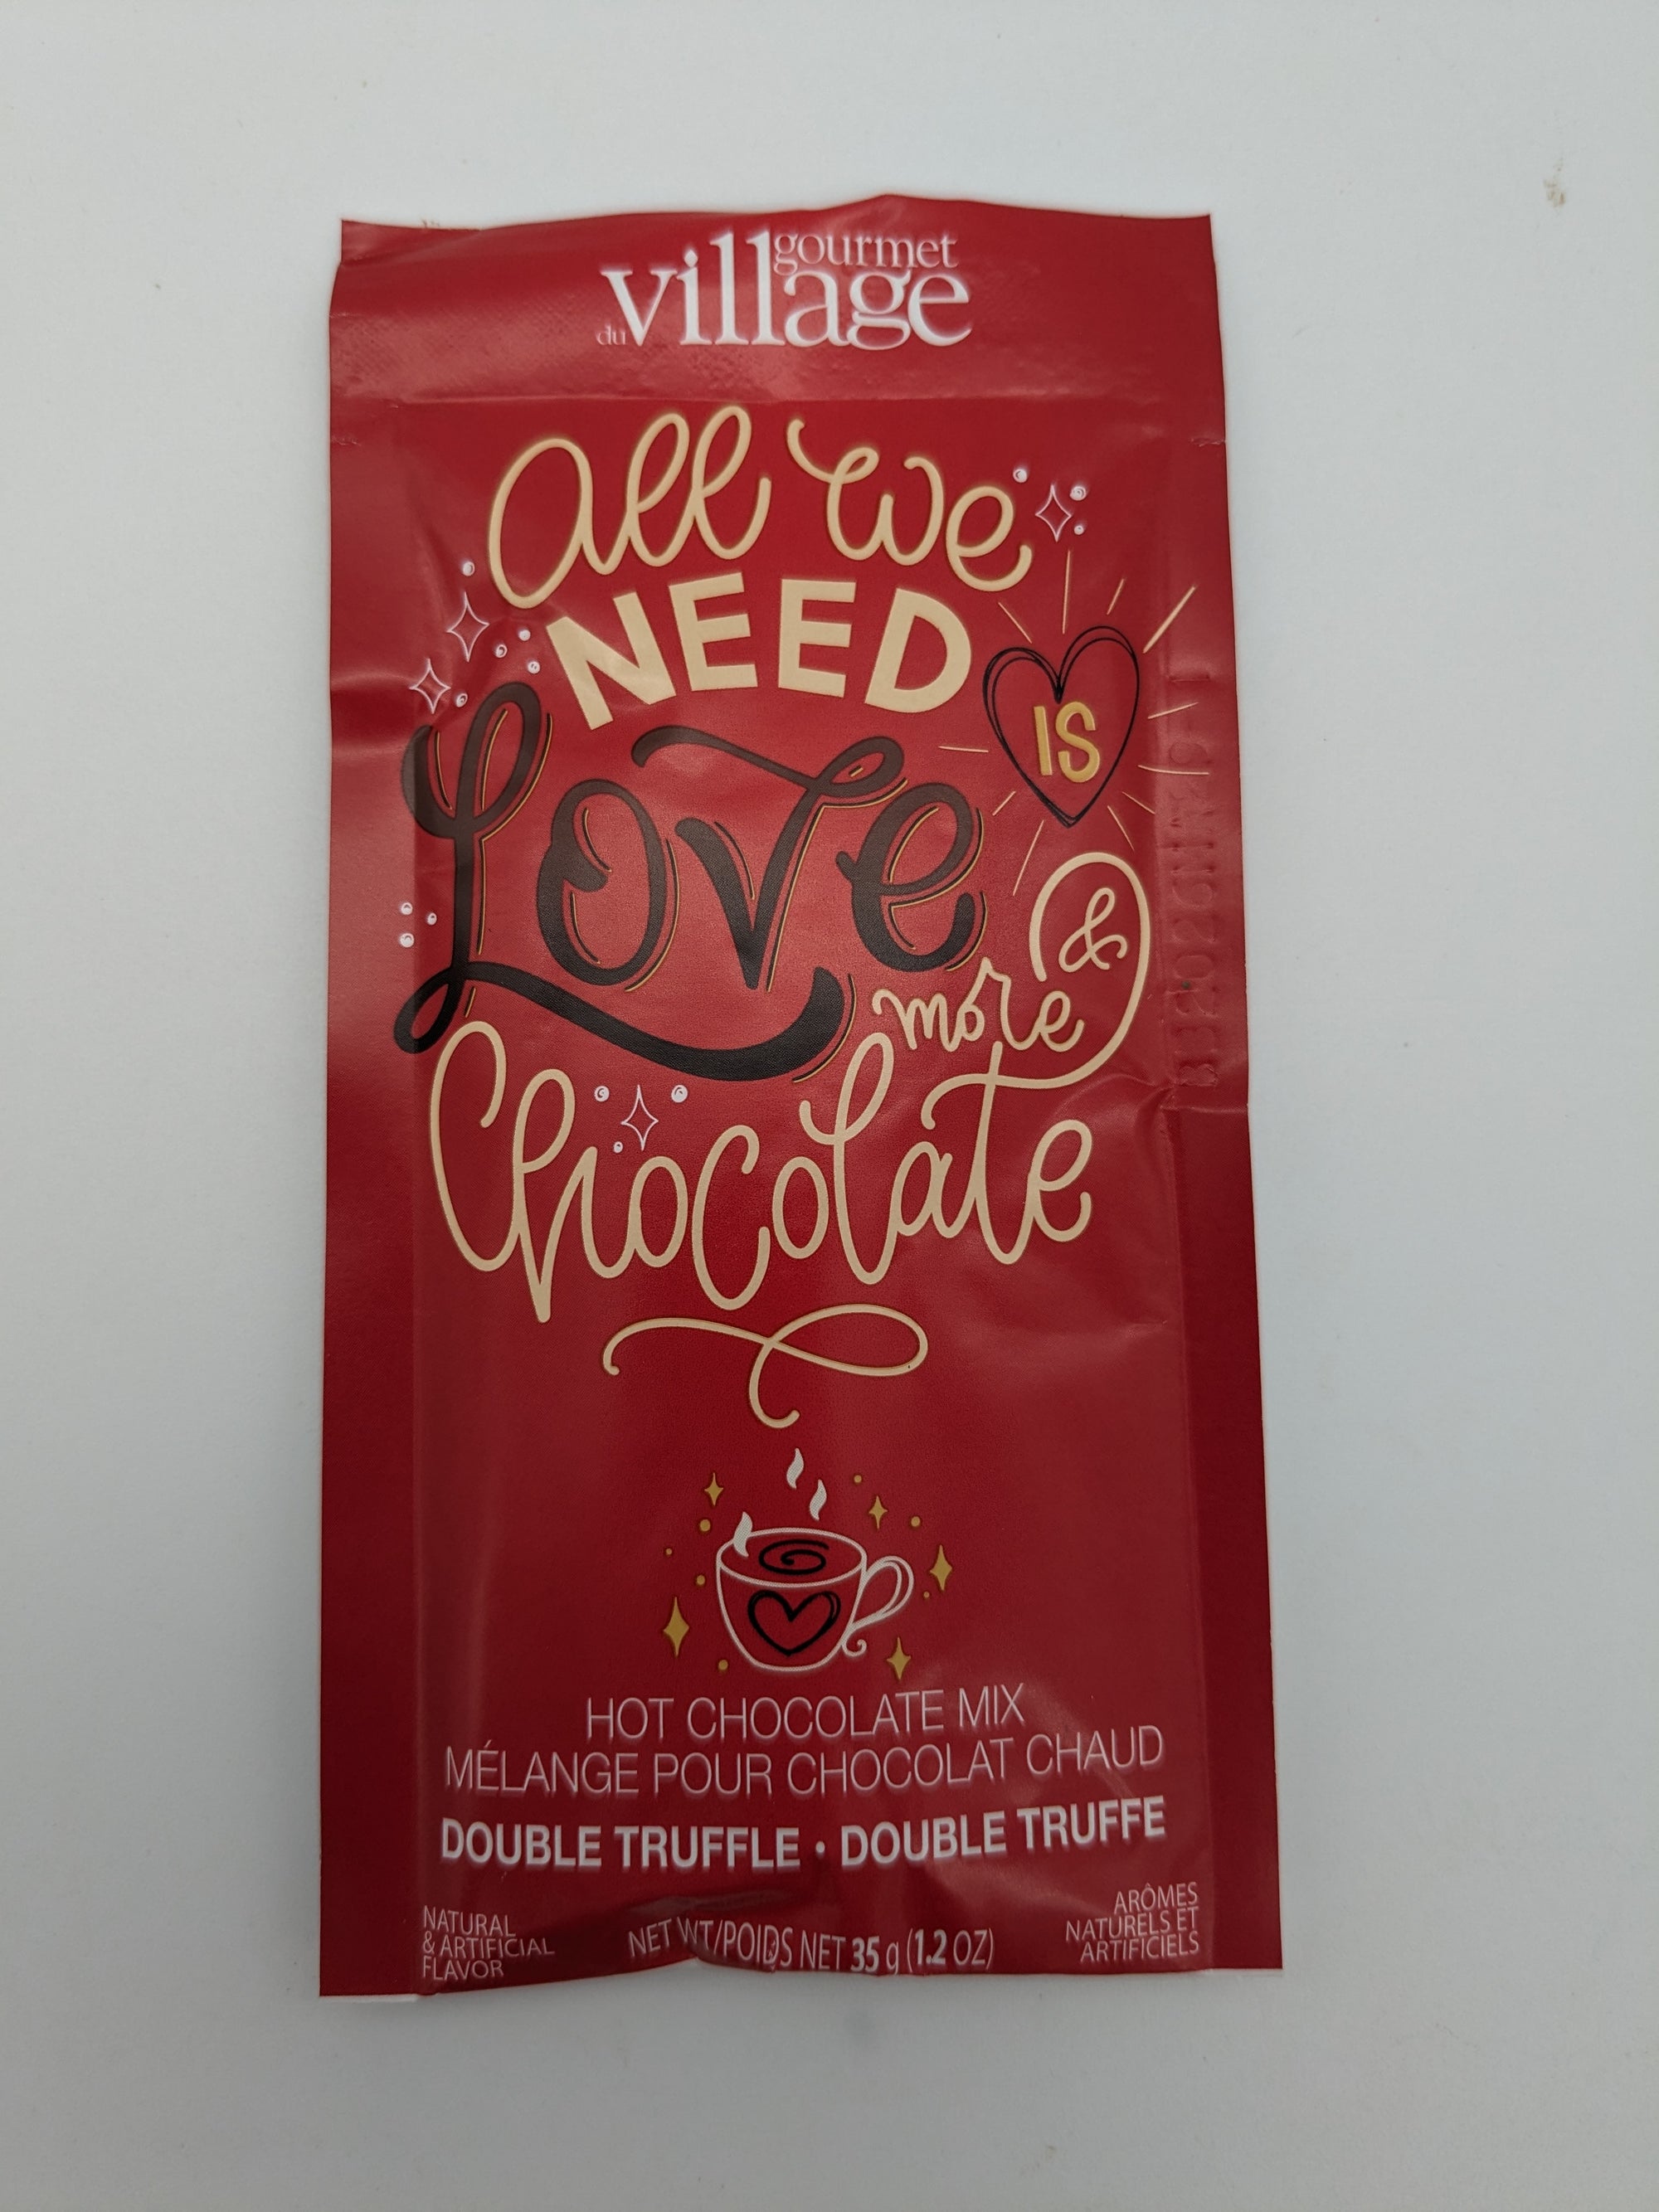 Double Truffle Hot Chocolate: All you need is Love